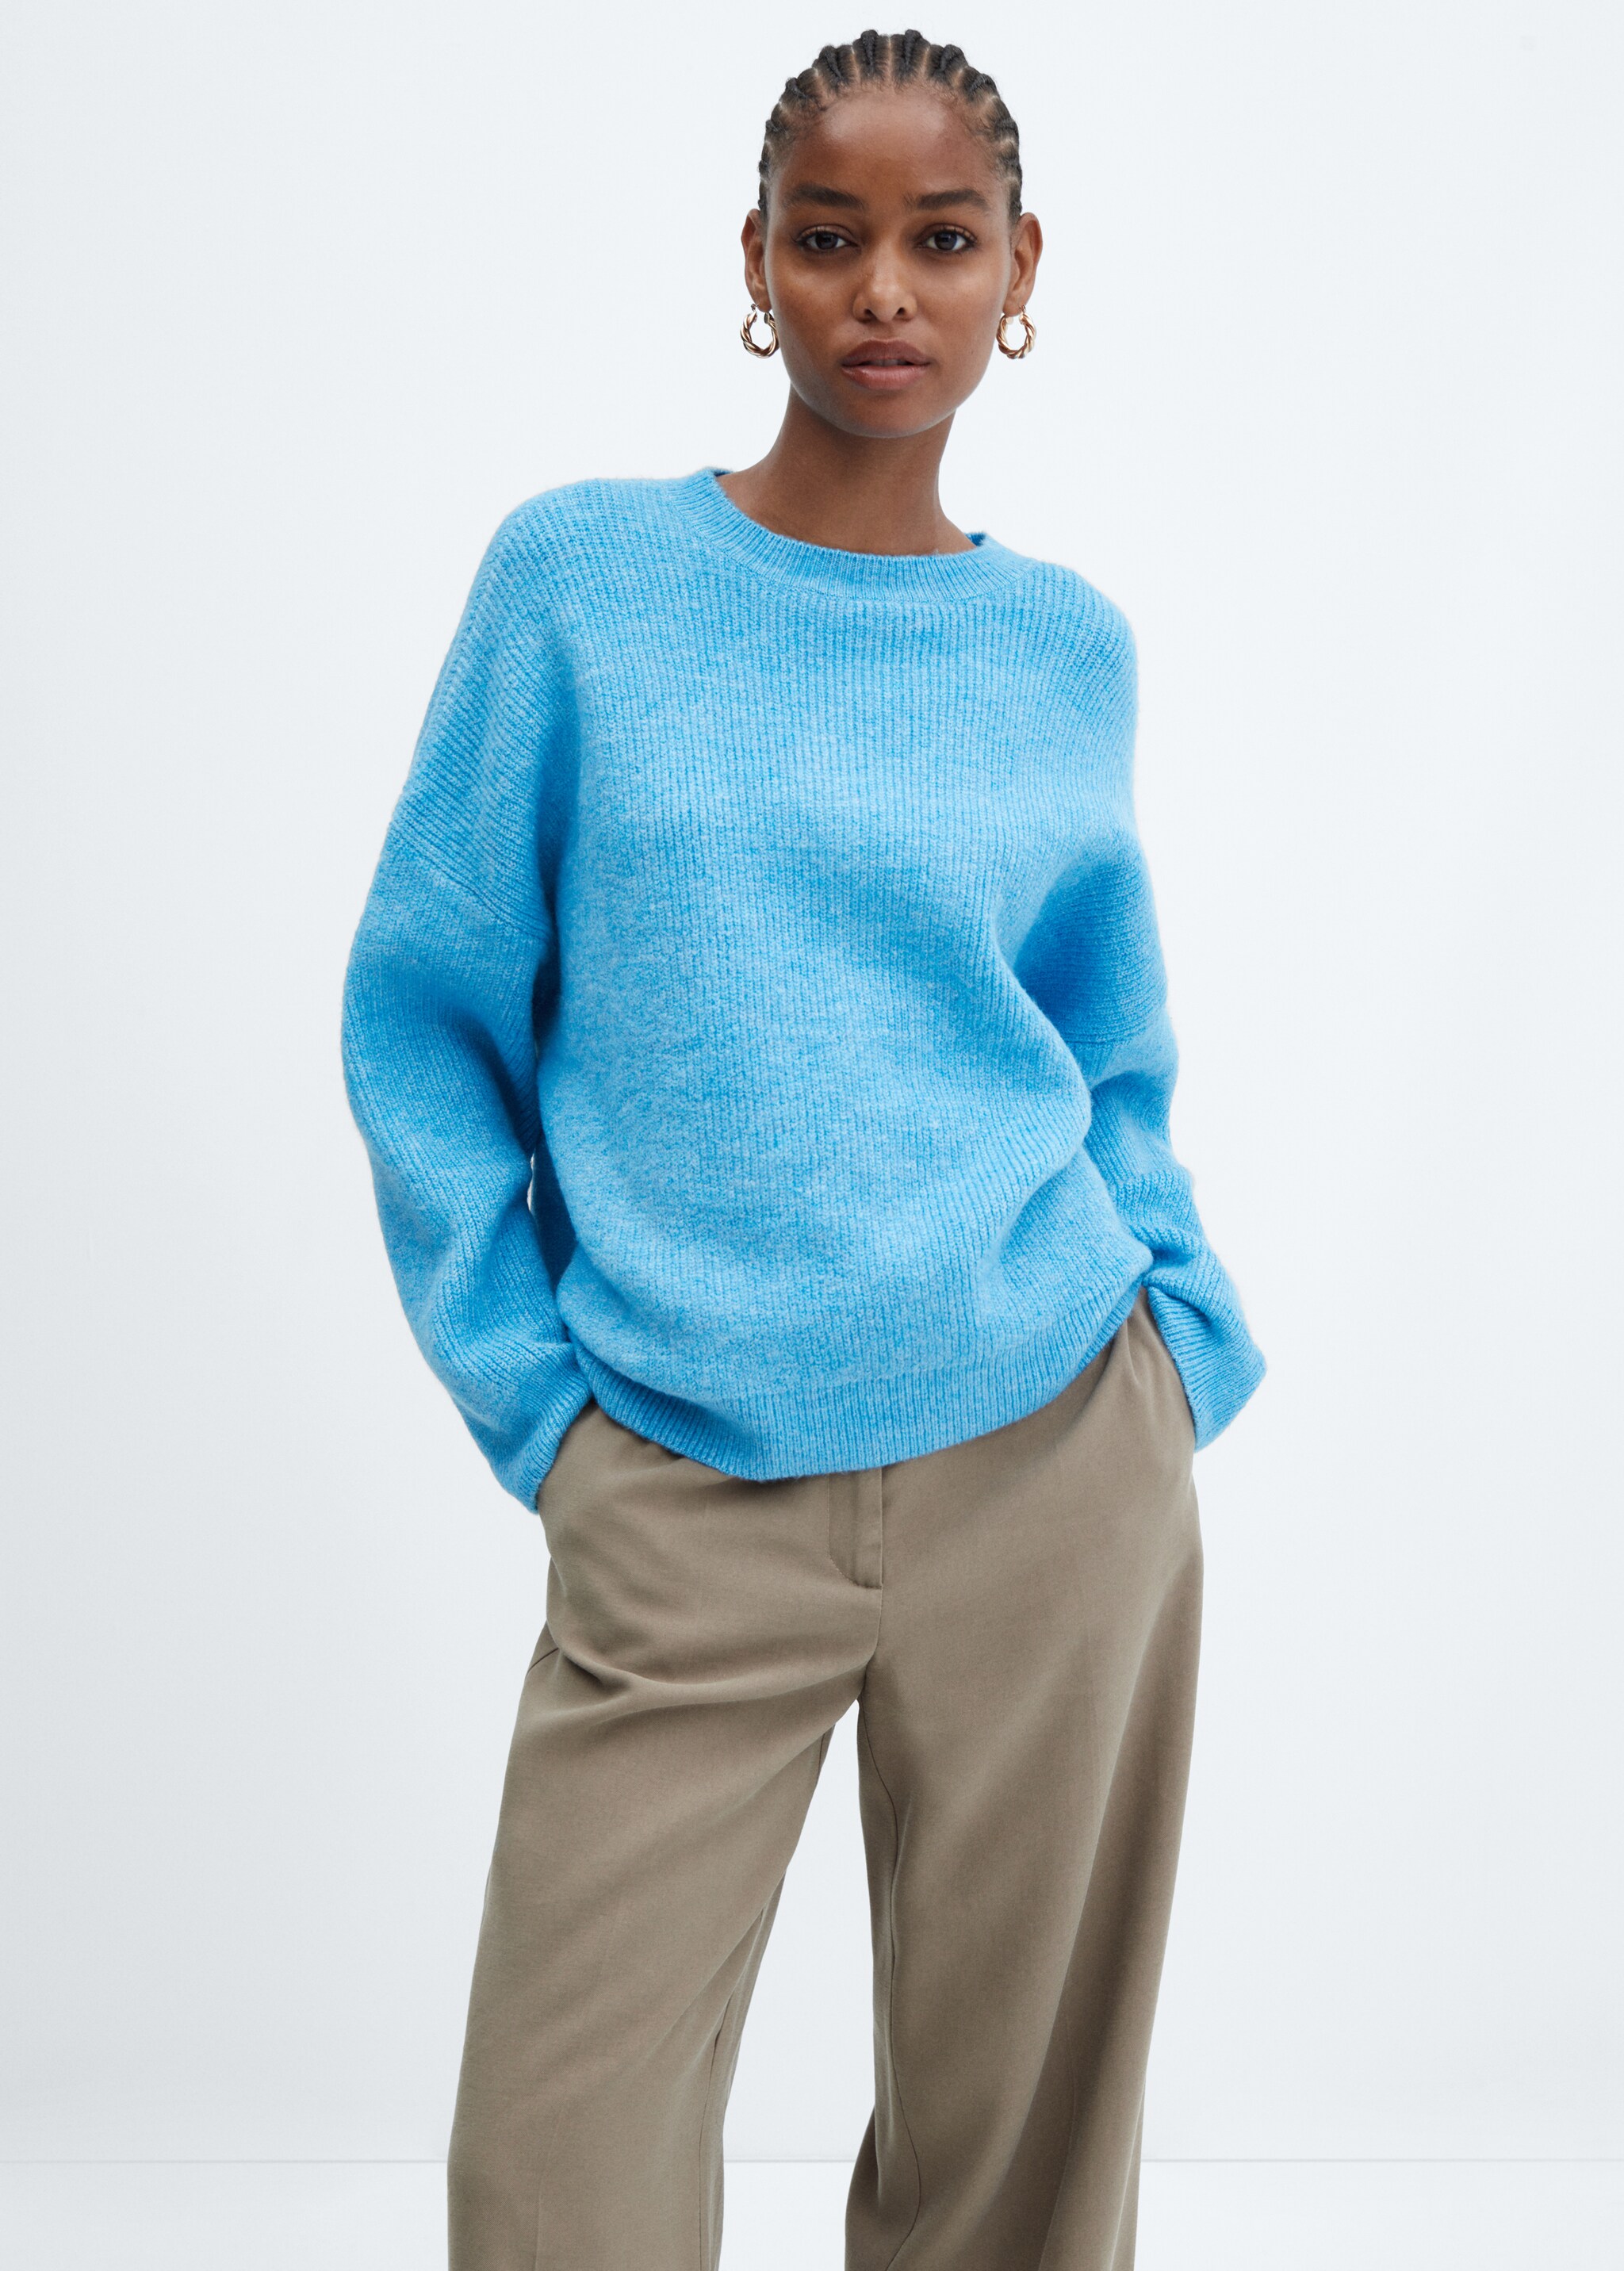 Oversized sweater with dropped shoulders - Medium plane